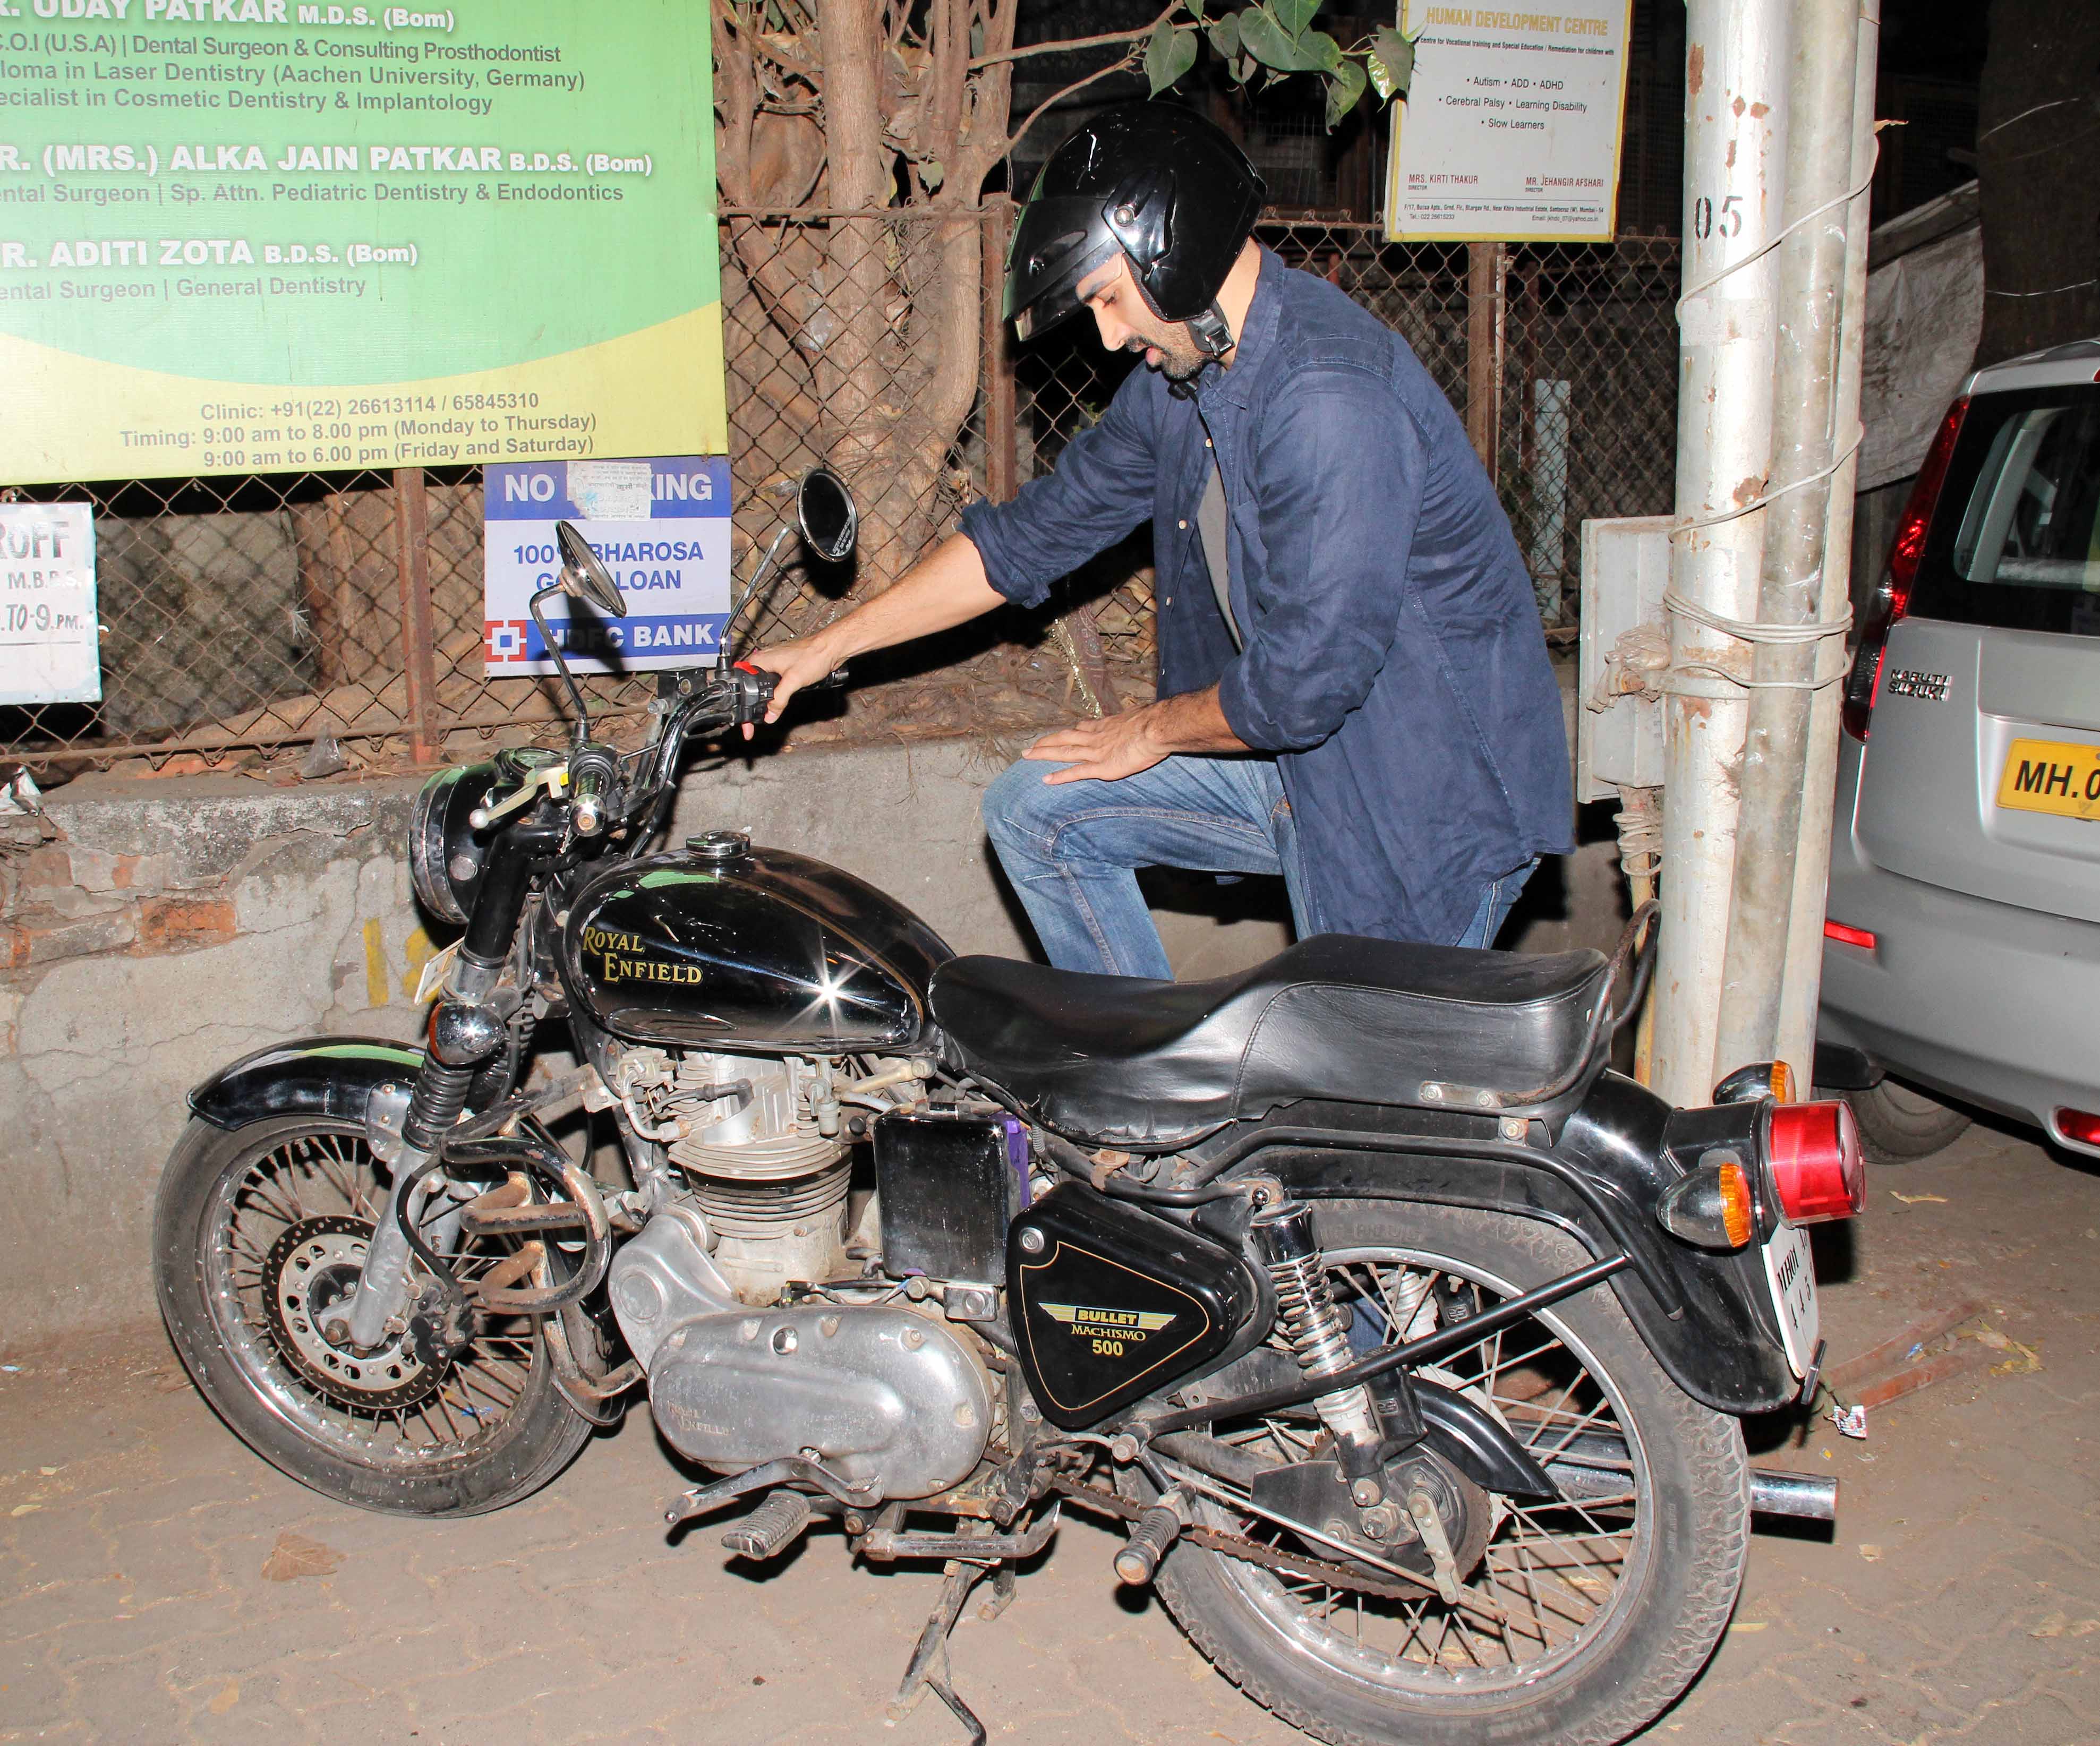 B-town boys in Bandra are known for their passion of bike | STARFRIDAY